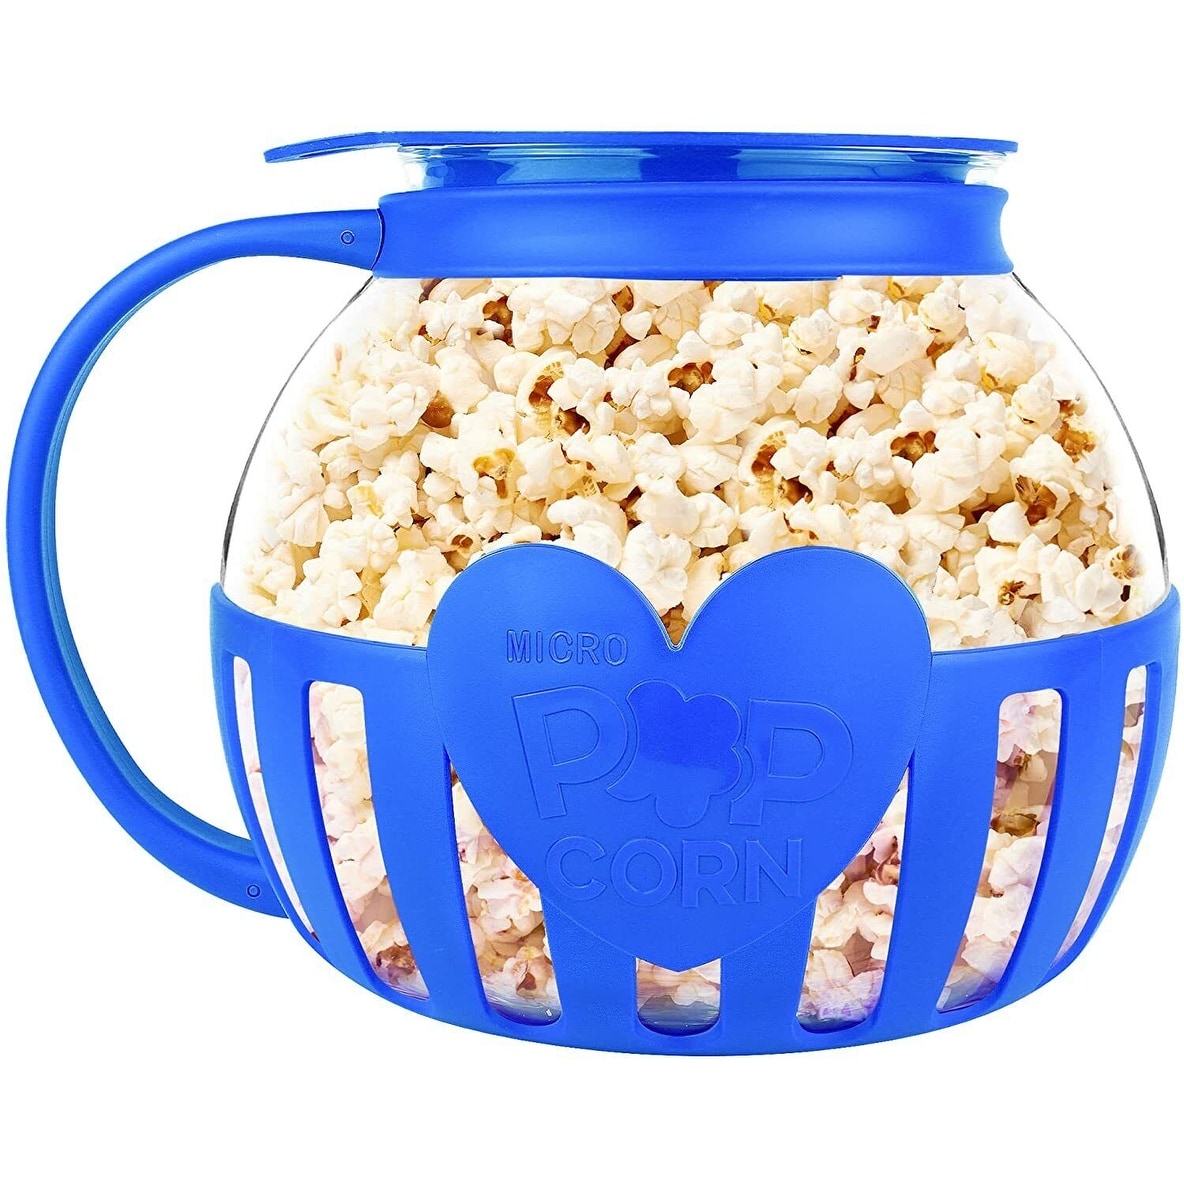 https://ak1.ostkcdn.com/images/products/is/images/direct/0fd0d4018b5258d30fe6b60910fd0d990668d8e5/3-in-1-Microwave-Glass-Popcorn-Popper-3-qt-Family-Size.jpg